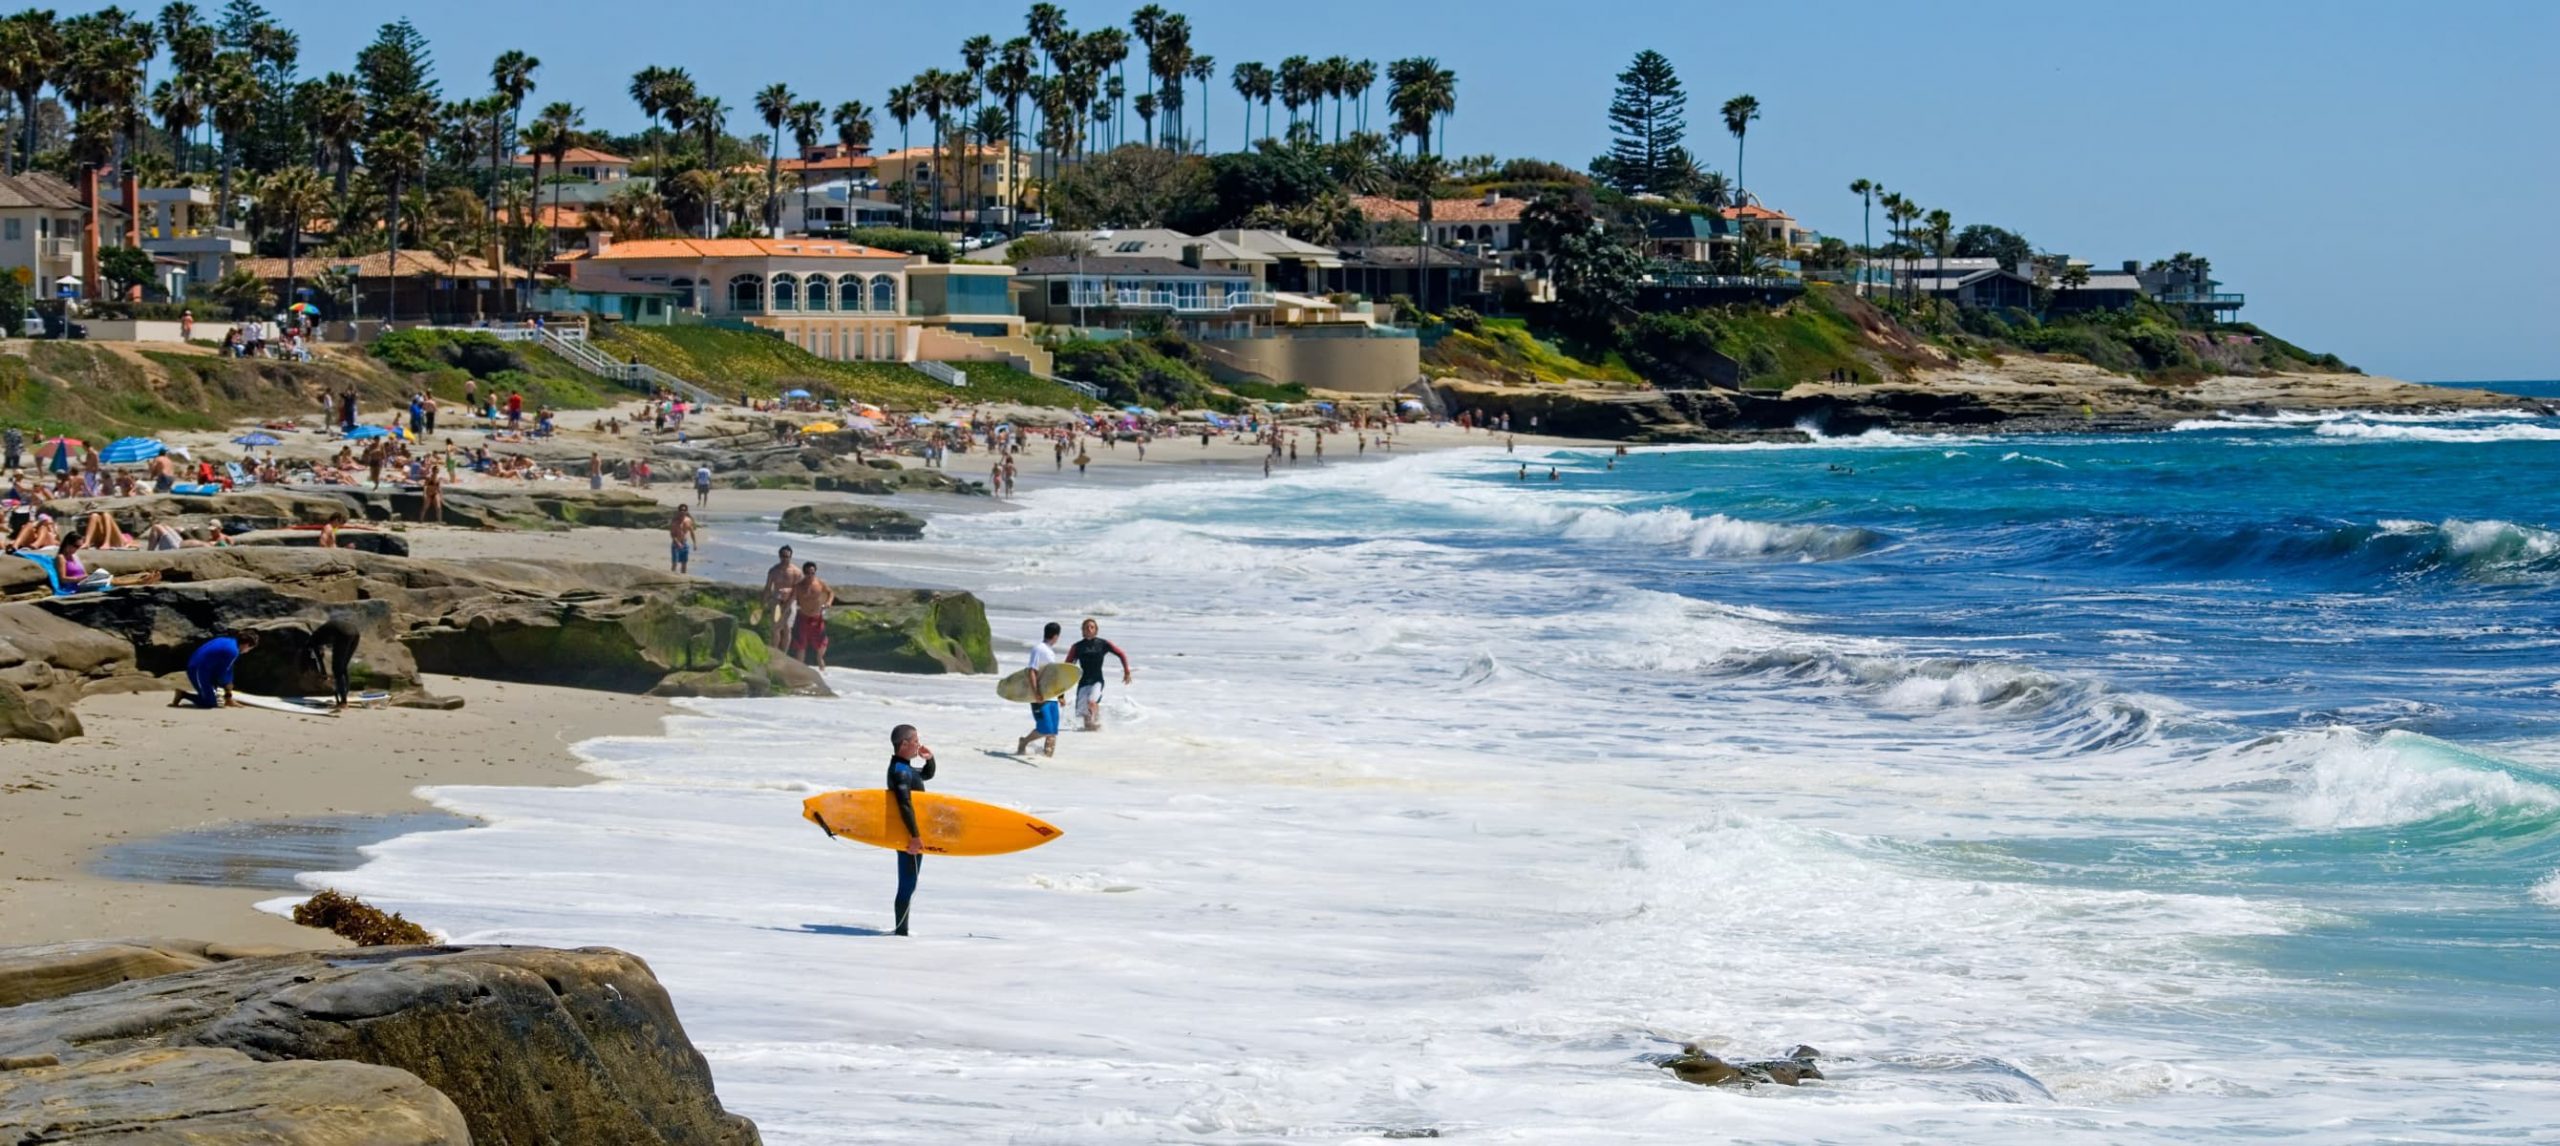 The 16 Most Amazing Things To Do in San Diego, California